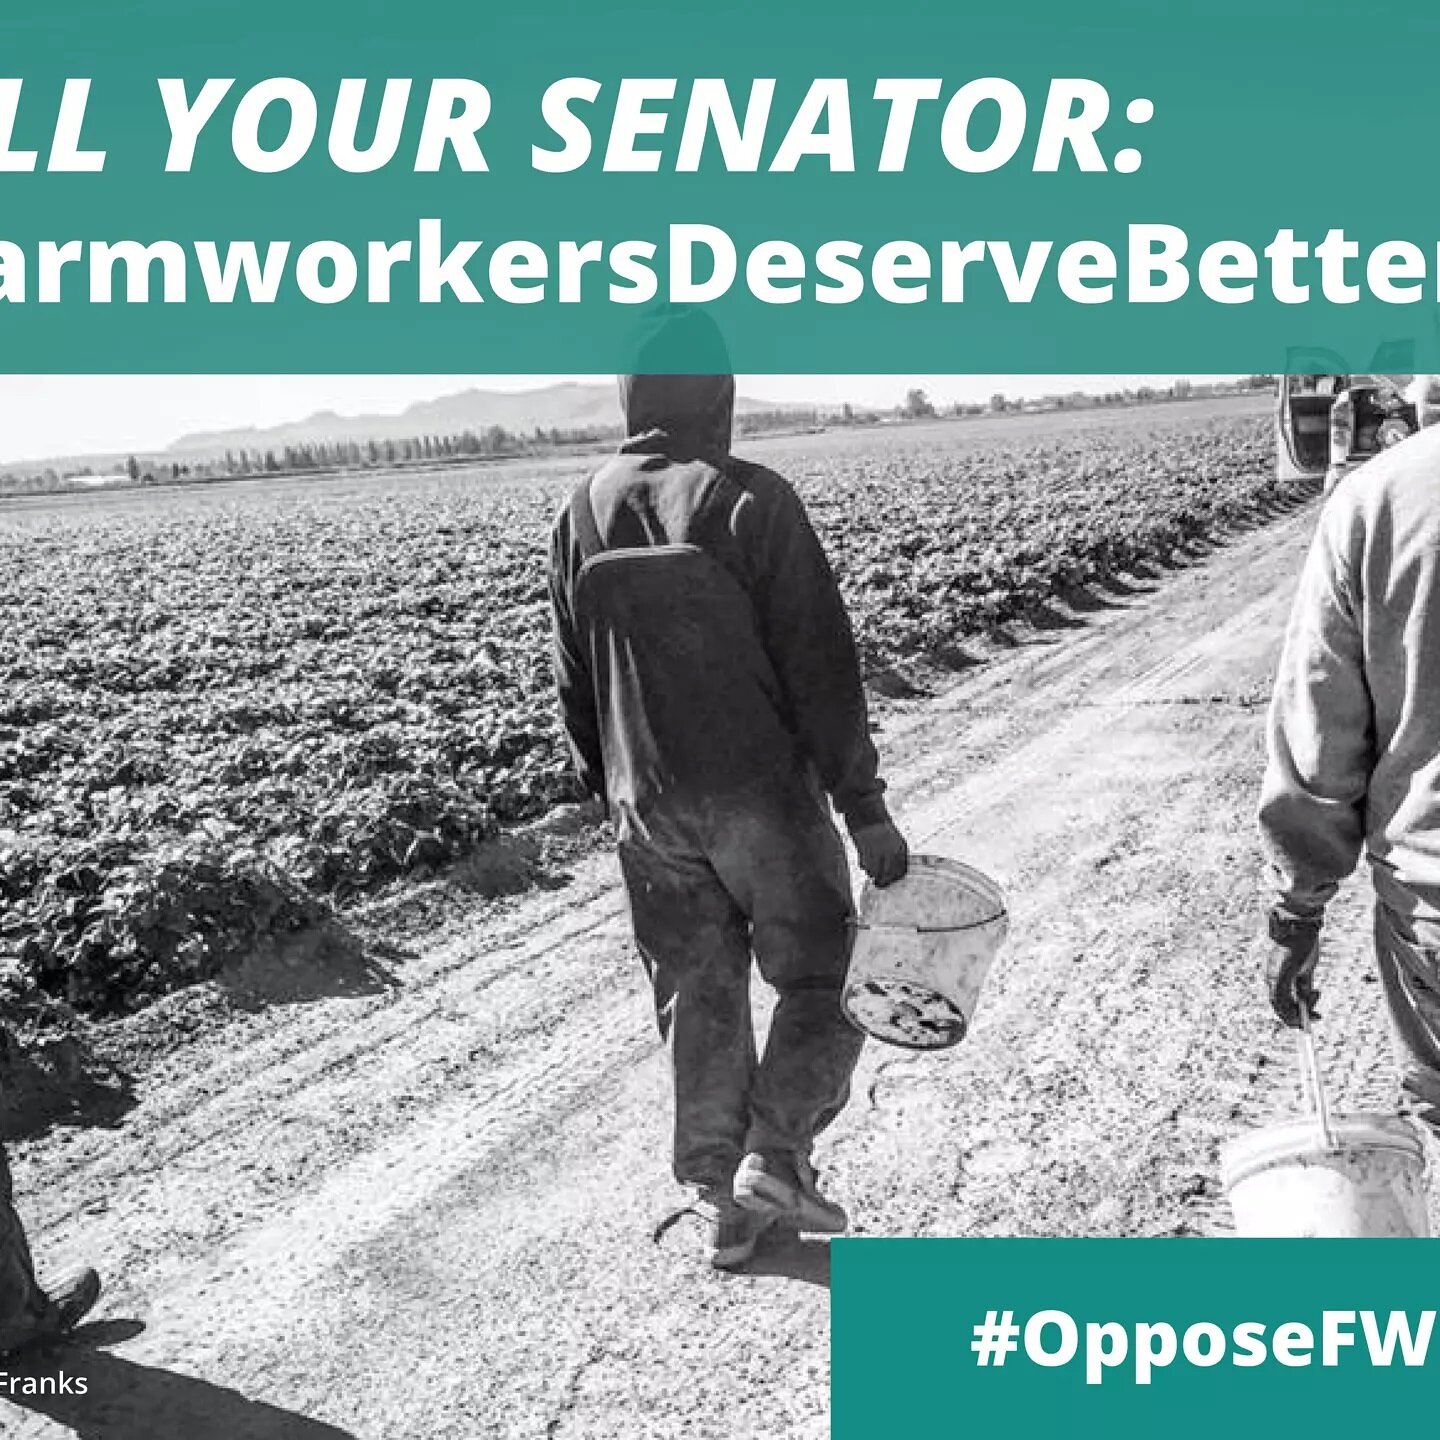 The Farm Workforce Modernization Act expands an already exploitative H-2A program without necessary oversight. Stand with farmworkers opposing the bill and sign and share our petition today. http://bit.ly/OpposeFWMA2021
#OpposeFWMA